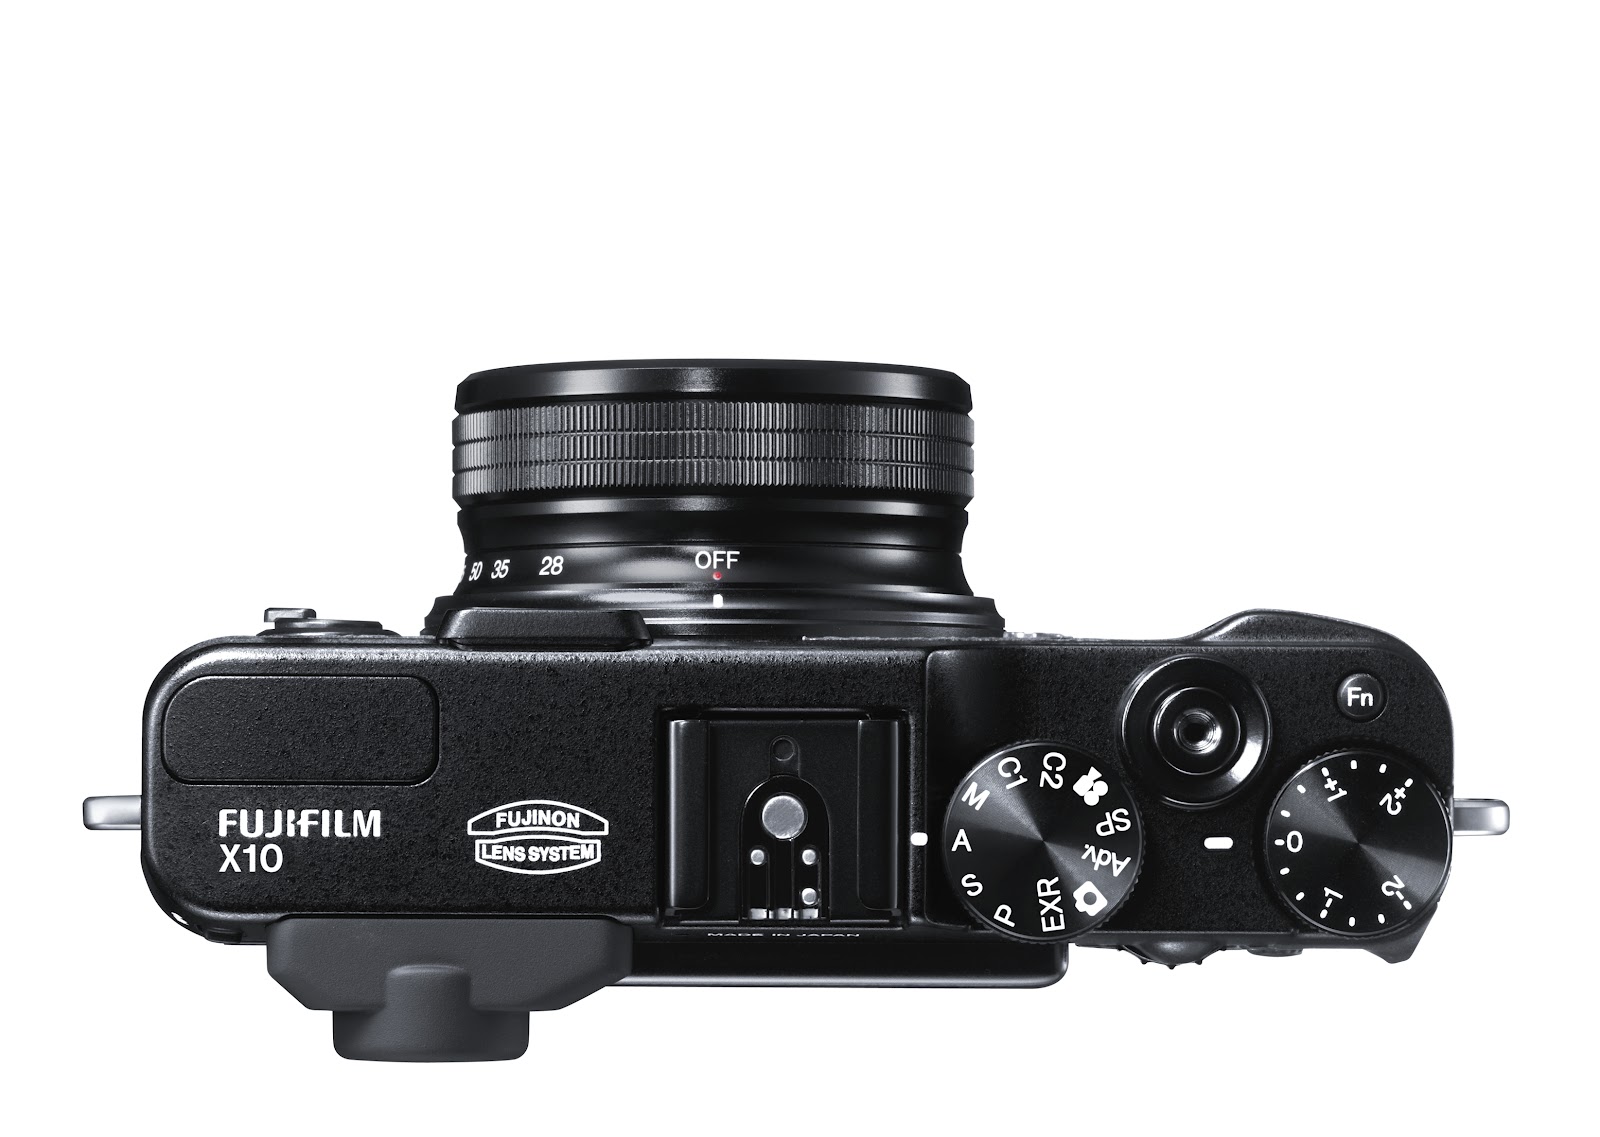 PHOTOGRAPHIC CENTRAL: Fujifilm X10 Review